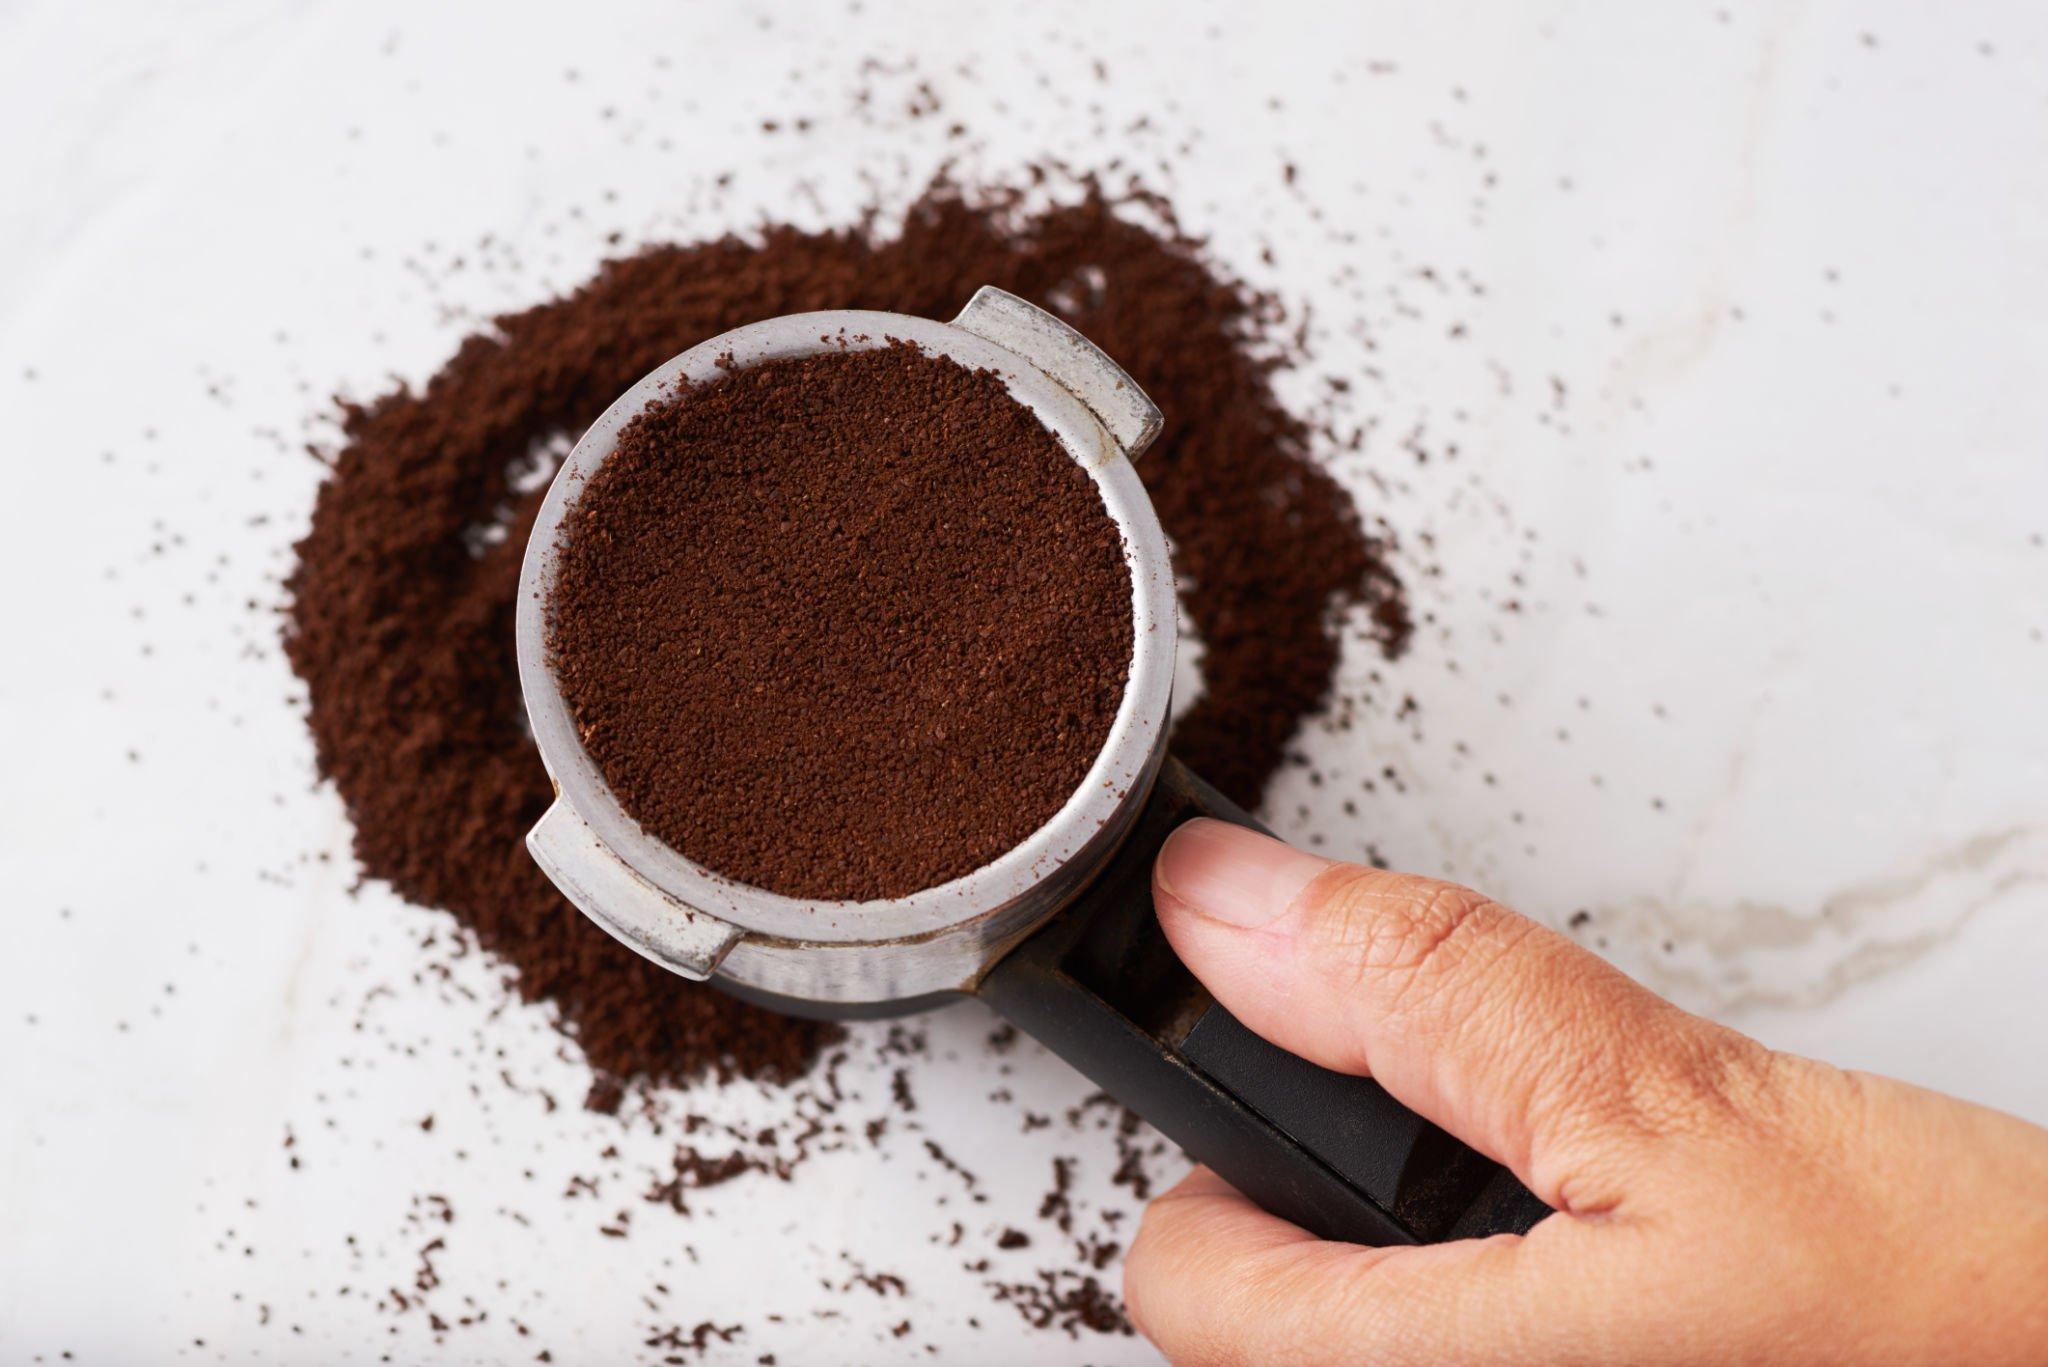 How to make coffee with a Bunn coffee maker: Step-by-step guide to perfect coffee every time